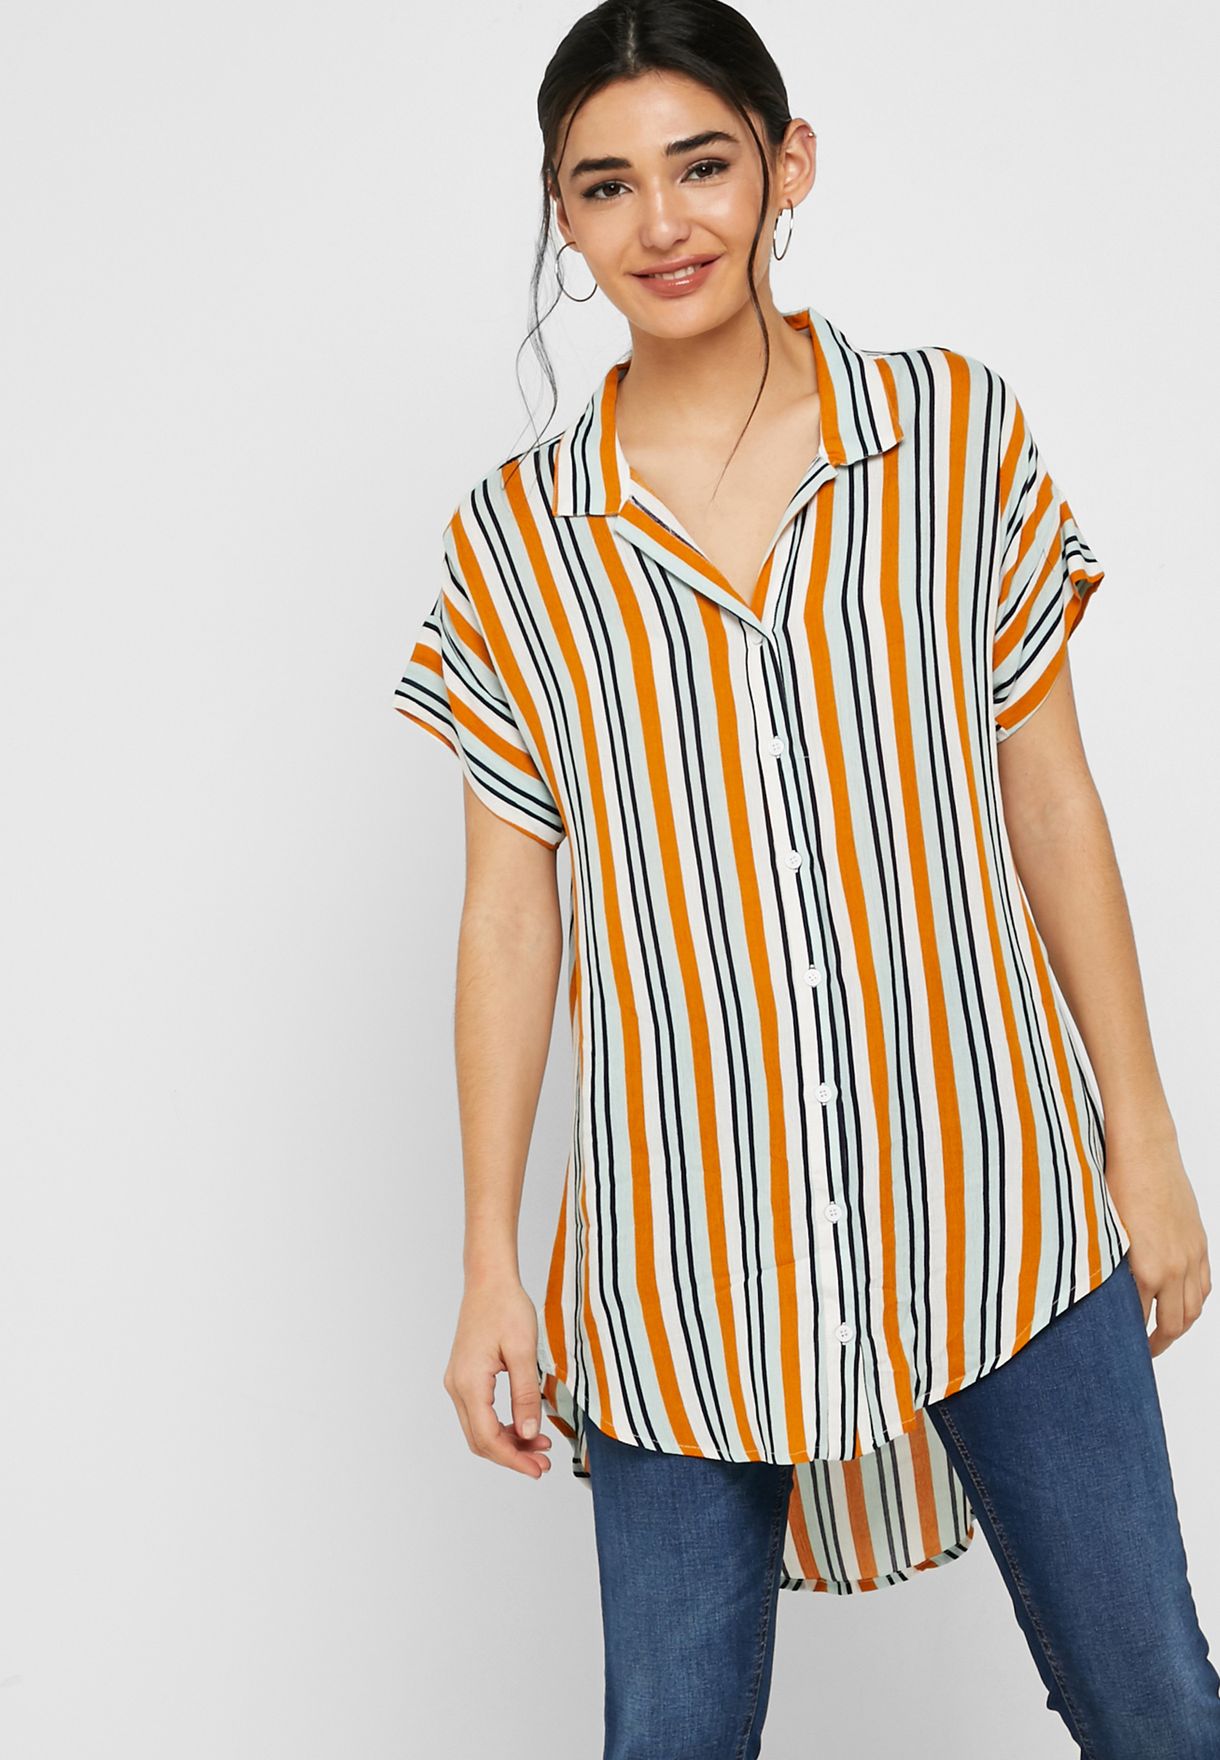 Lumiere stripes High Low Striped Shirt 